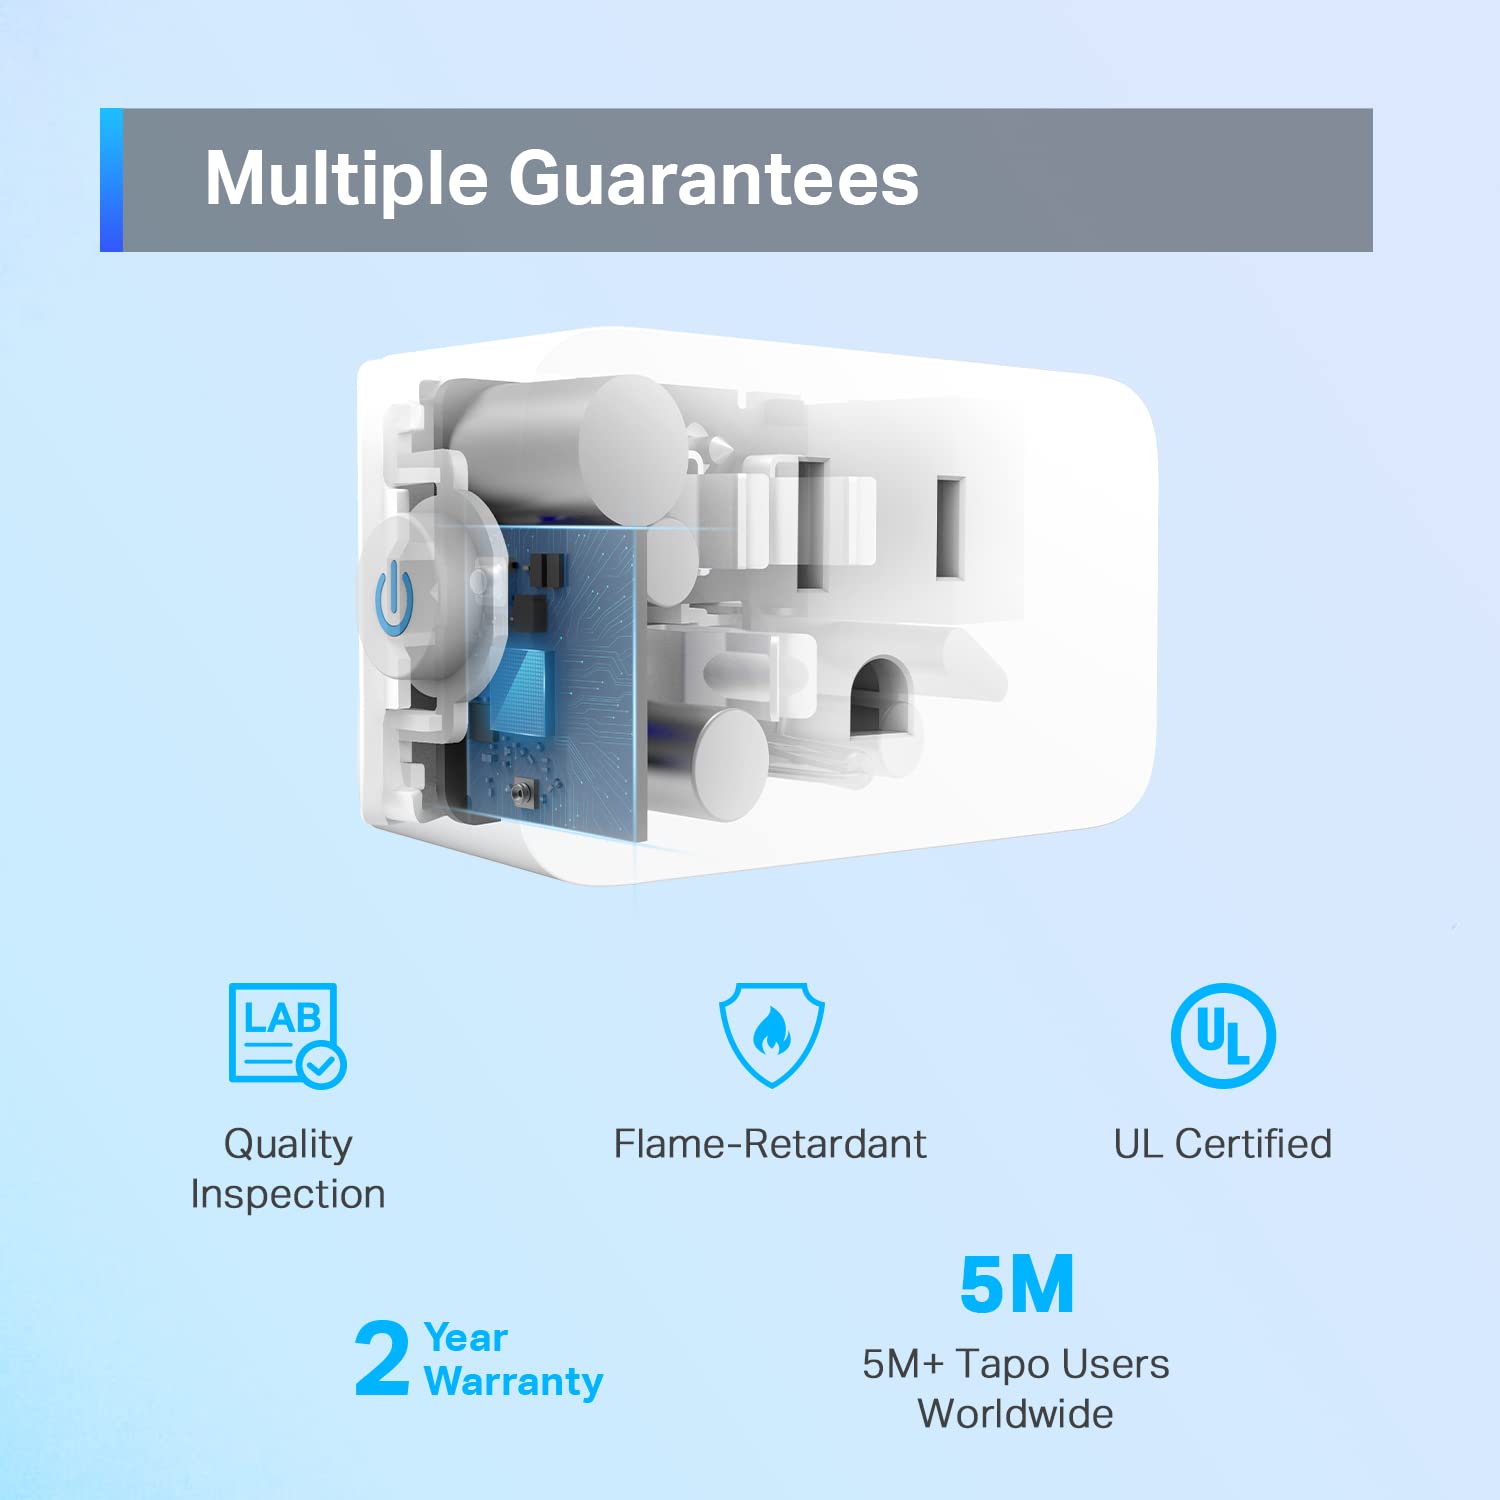 TP-Link Tapo Smart Plug Mini 15A, Smart Home Wi-Fi Plug, Super Easy Setup, Compatible with Alexa & Google Home, No Hub Required, UL Certified, 2.4G WiFi Only, White, Tapo P105(4-Pack)